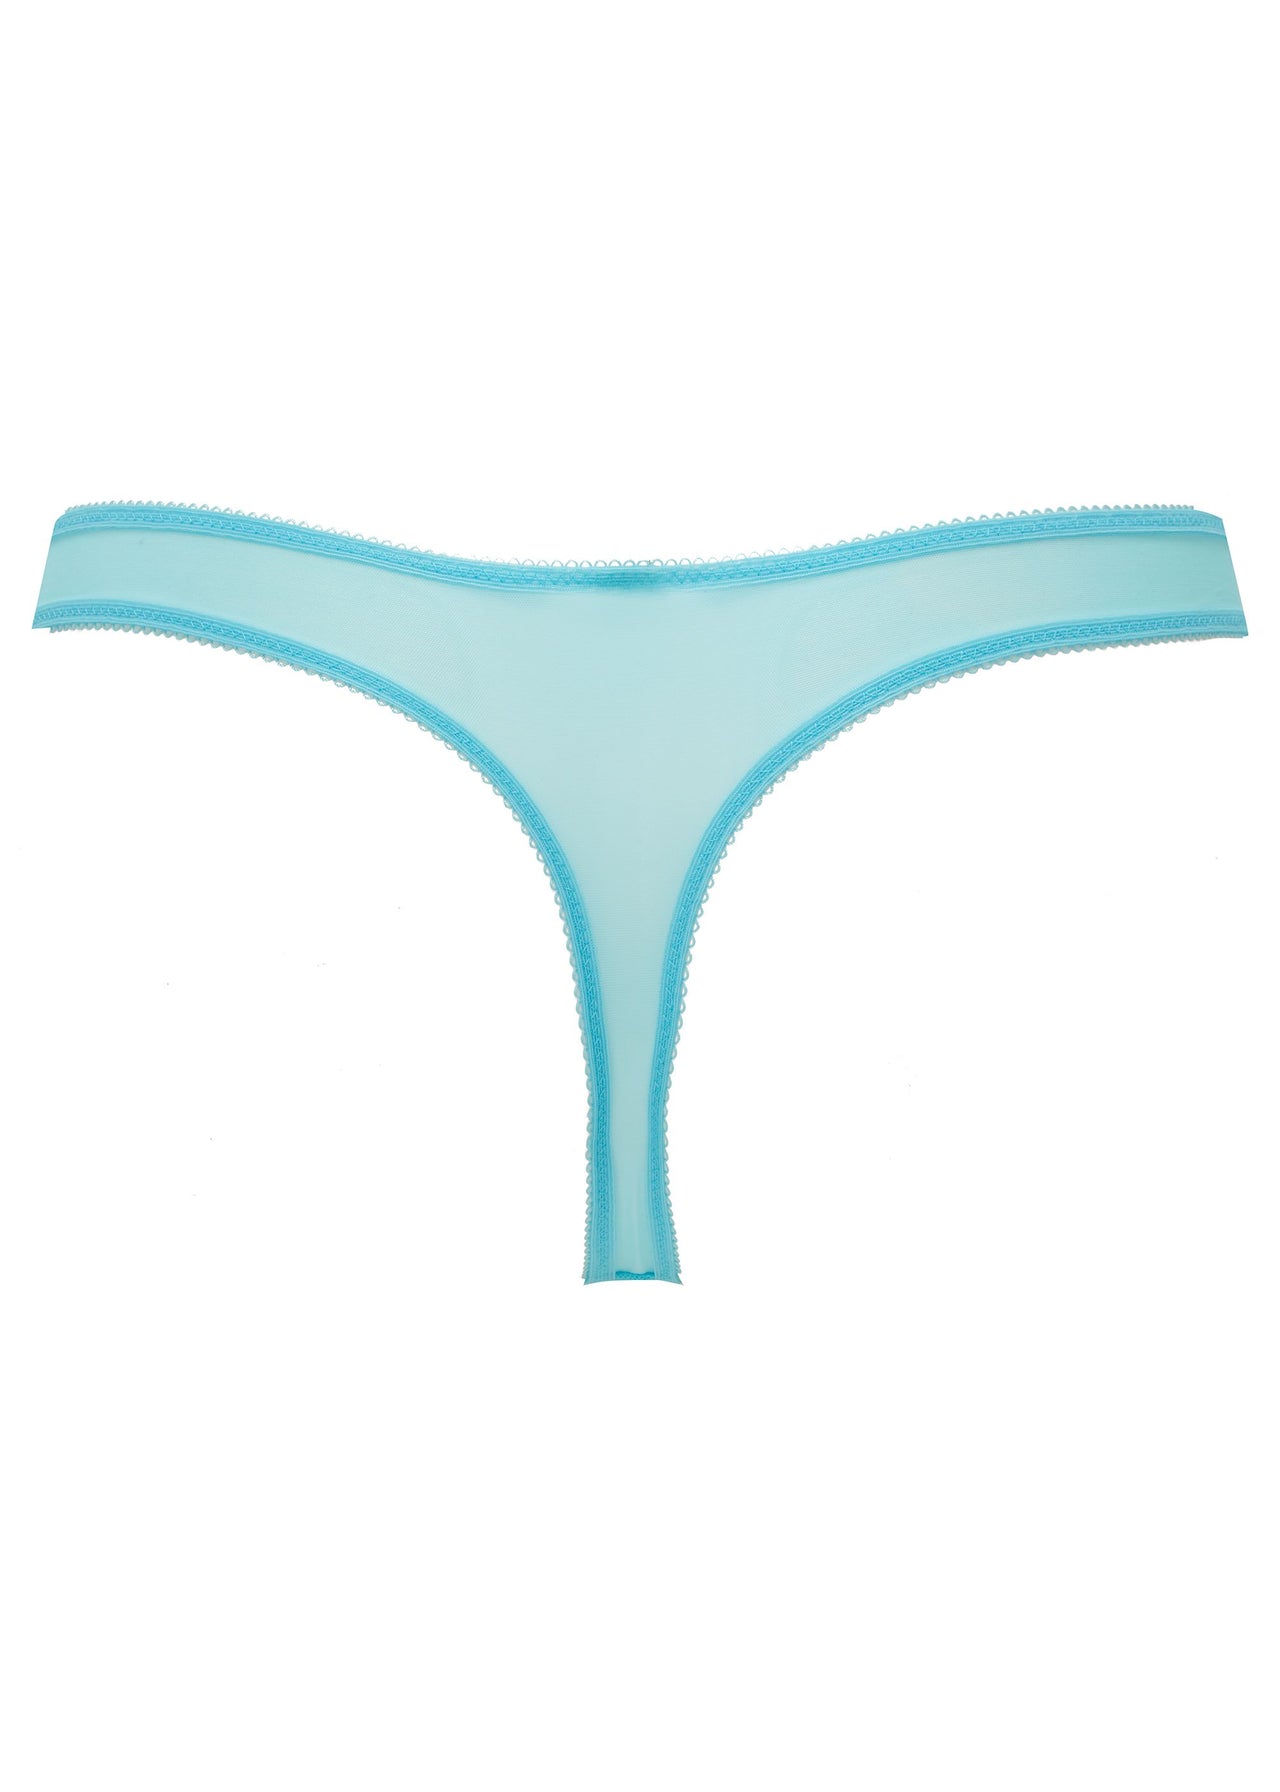 Gossard Glossies Lace Thongs - Turquoise